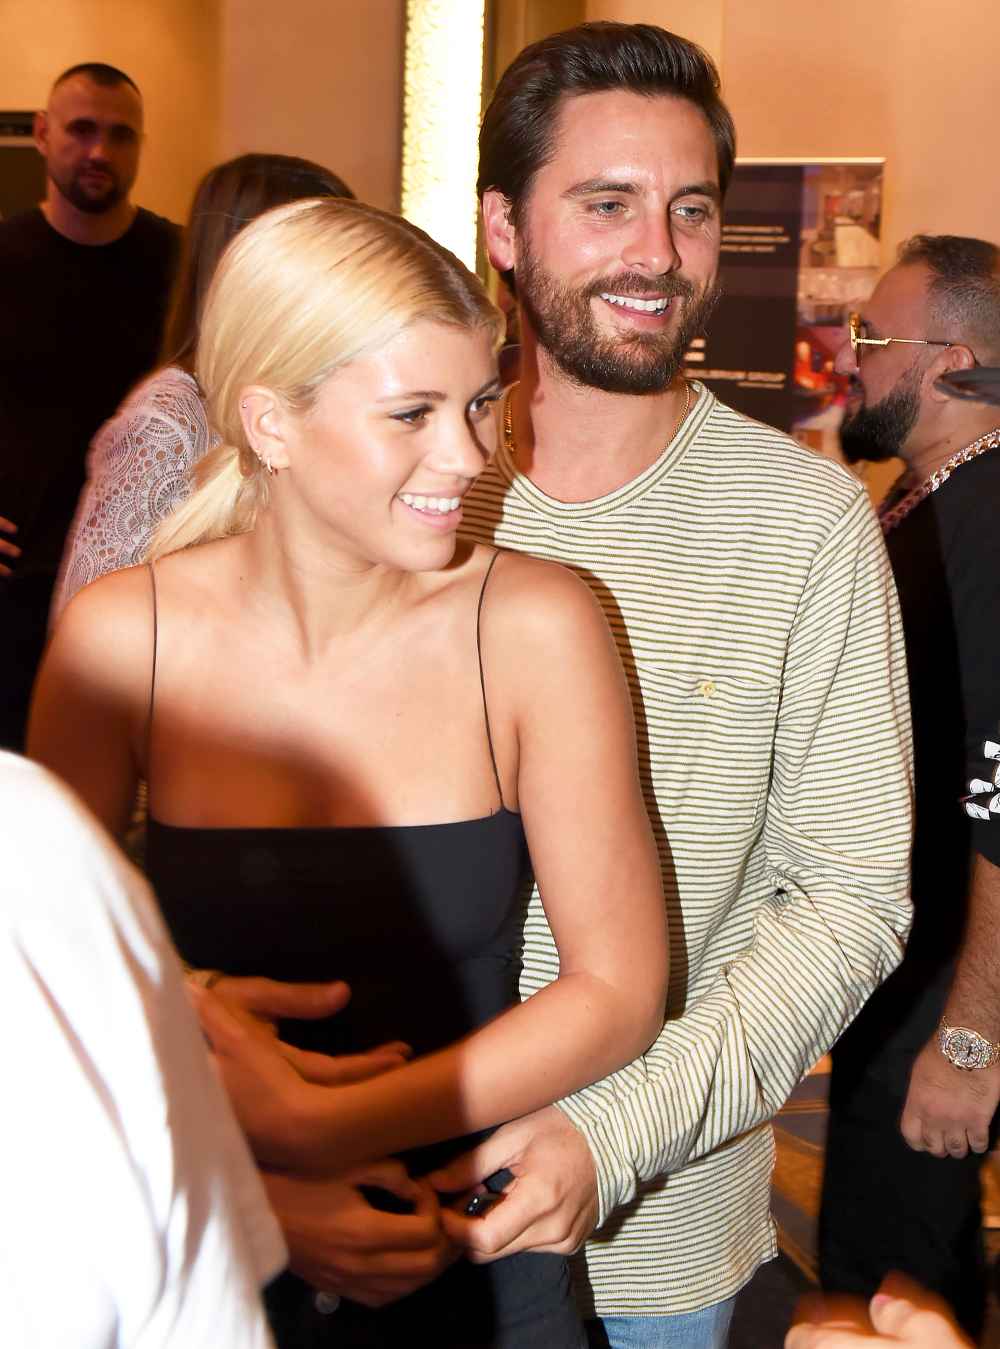 Sofia Richie and Scott Disick attend Haute Living's VIP Pop-Up opening of Alec Monopoly from Art Life and David Yarrow from Medal's Gallery on December 7, 2017 in Miami Beach, Florida.